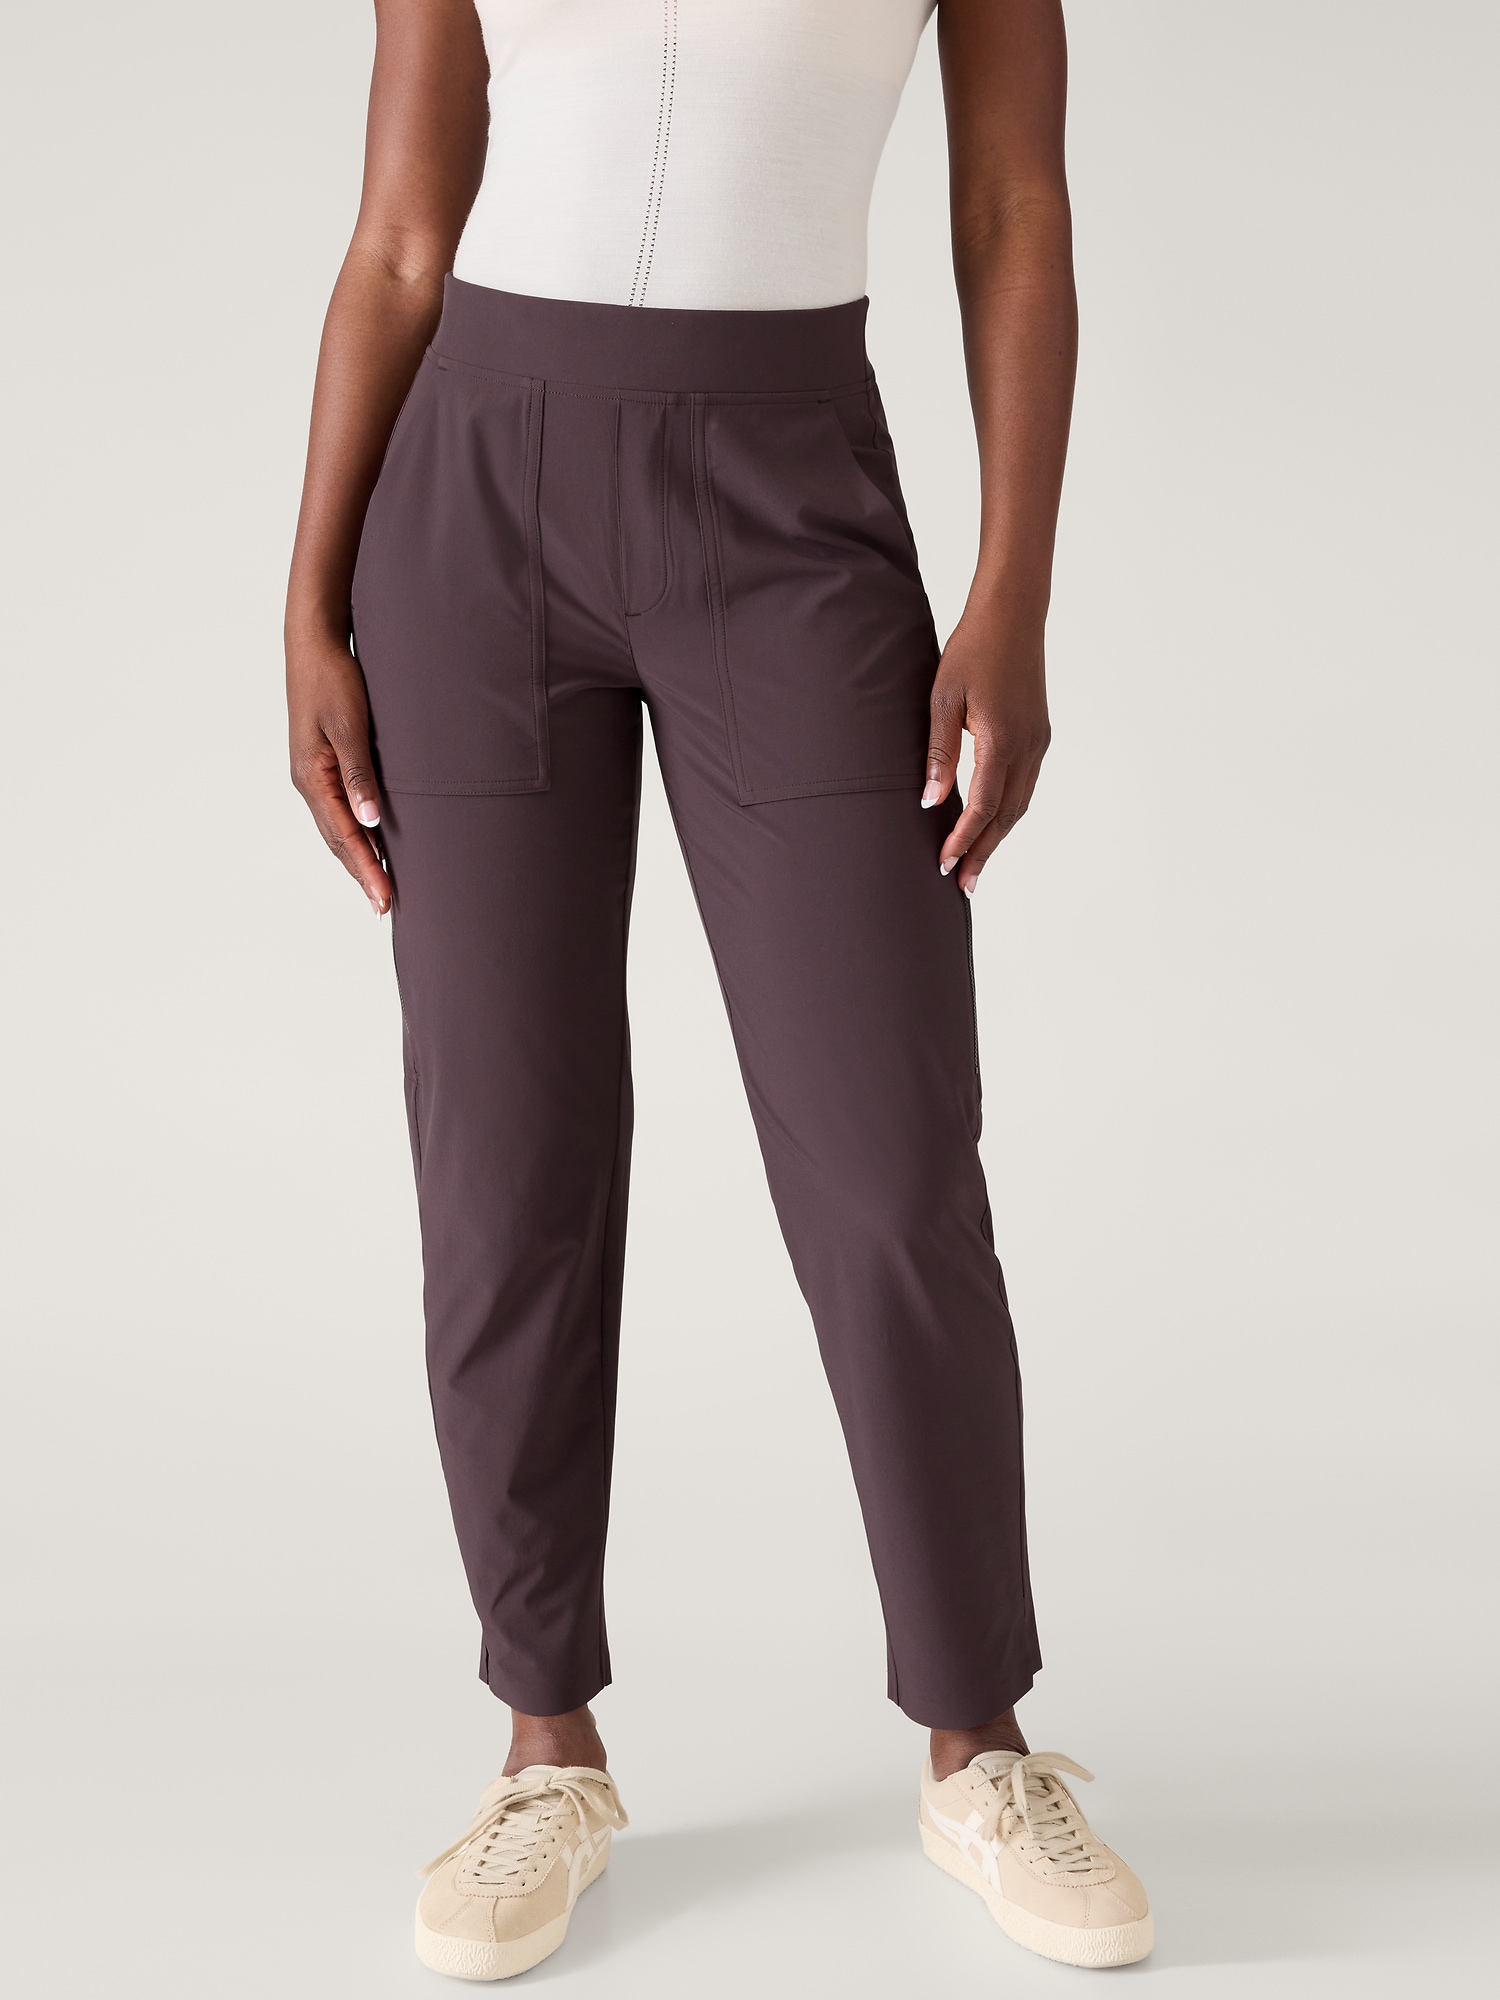 Athleta Brooklyn Ankle Utility Pant In Shale